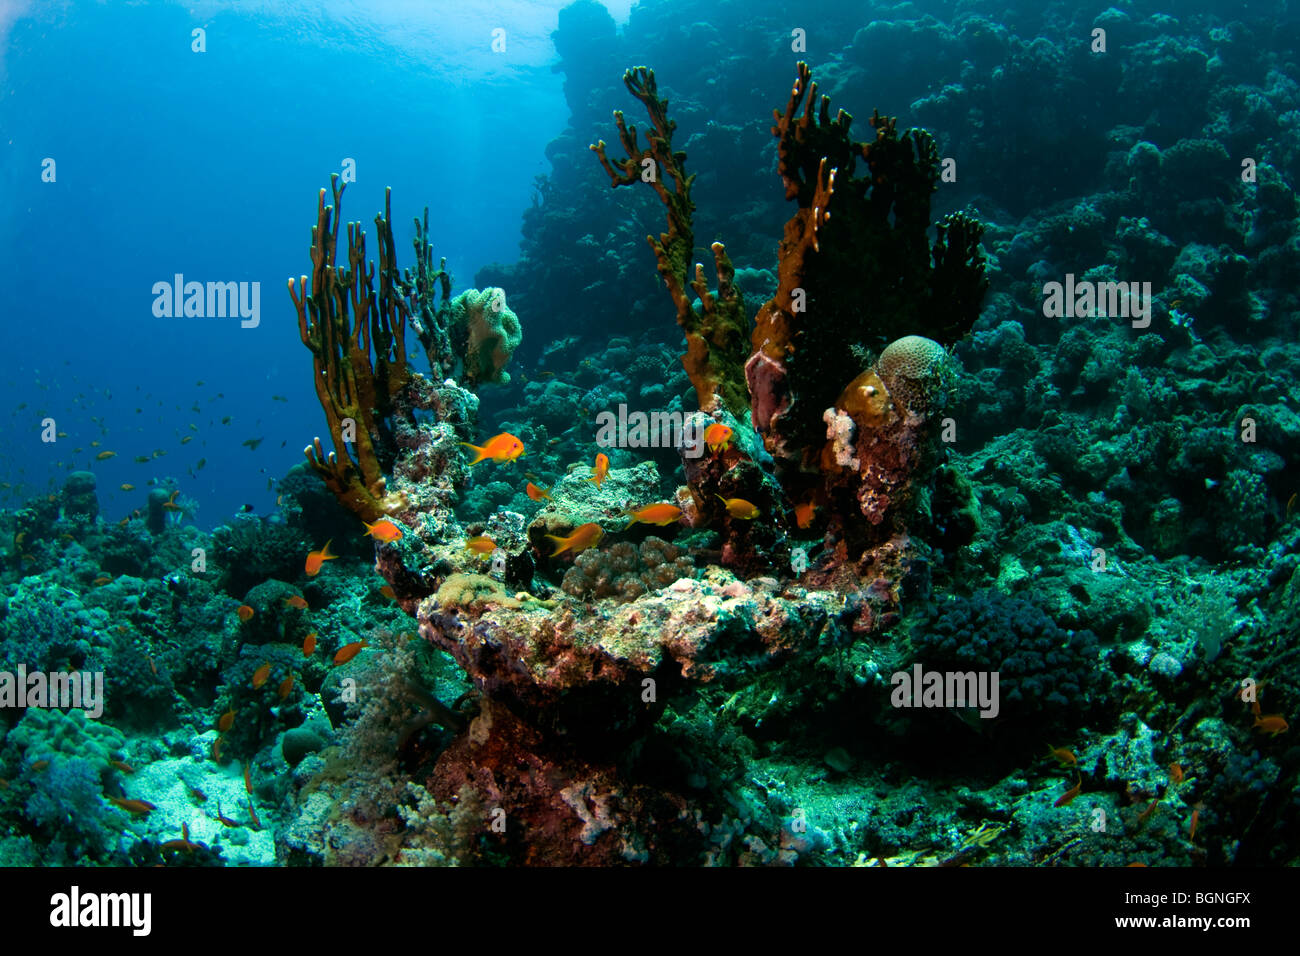 block-of-corals-at-a-reef-near-the-farasan-banks-in-the-red-sea-close-BGNGFX.jpg